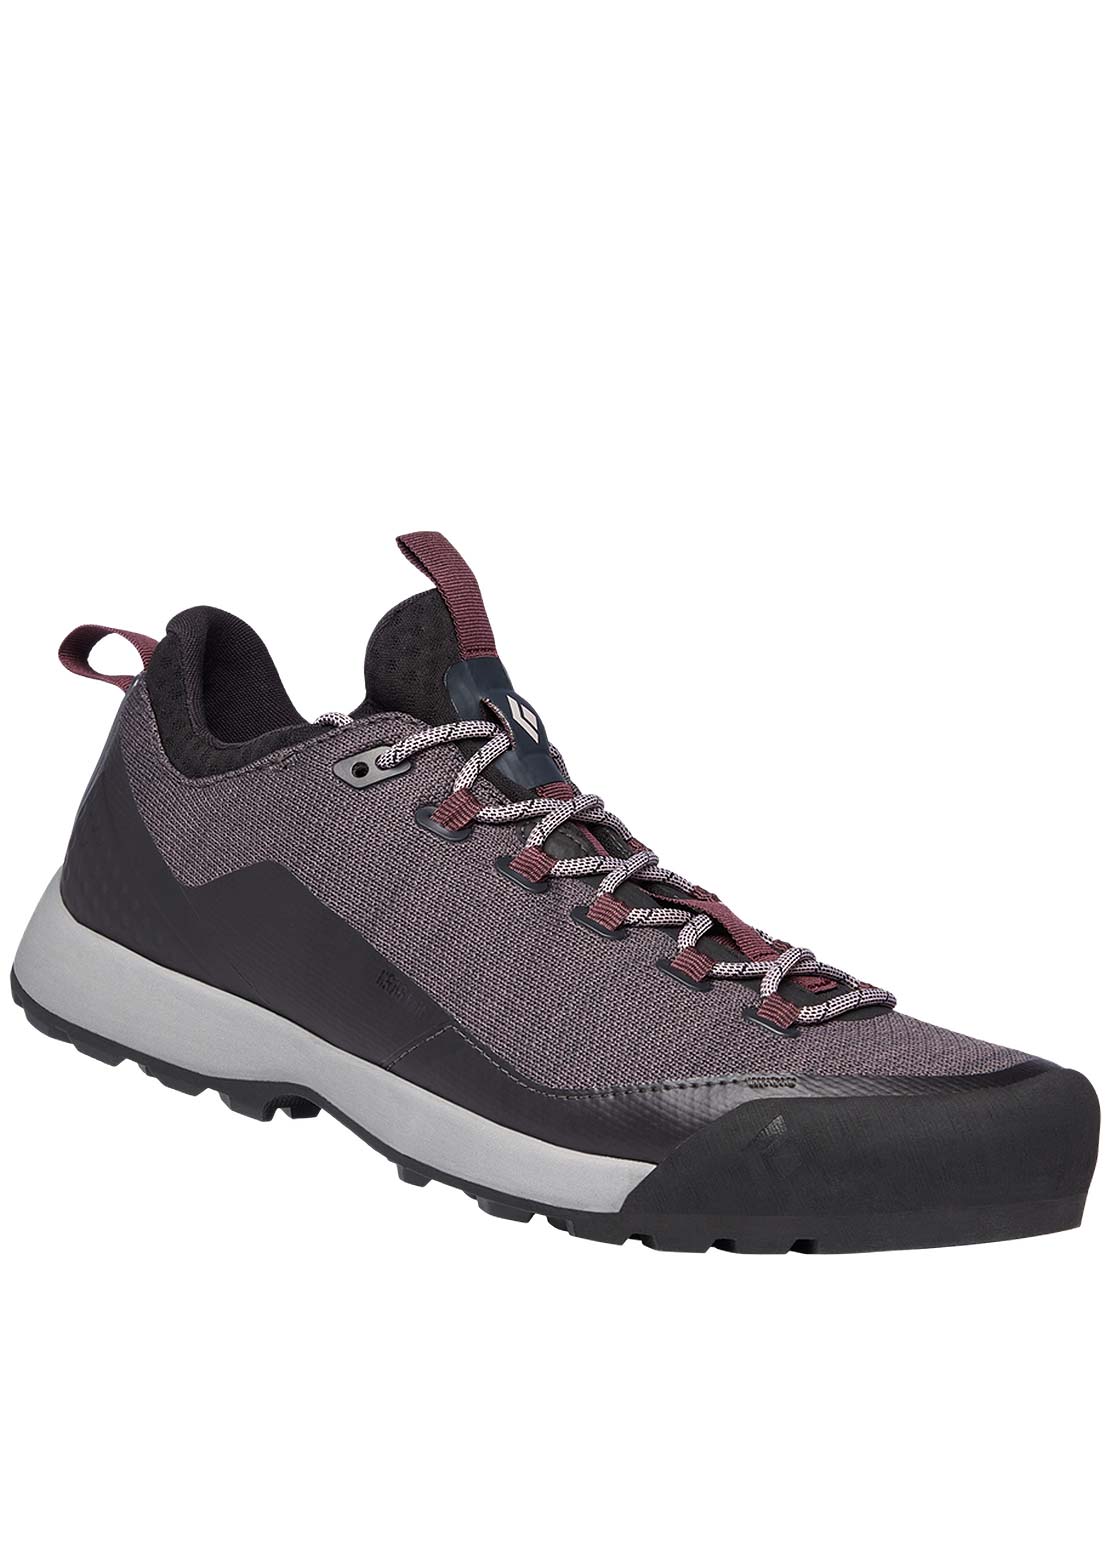 Black Diamond Women&#39;s Mission LT Approach Shoes Anthracite/Wisteria